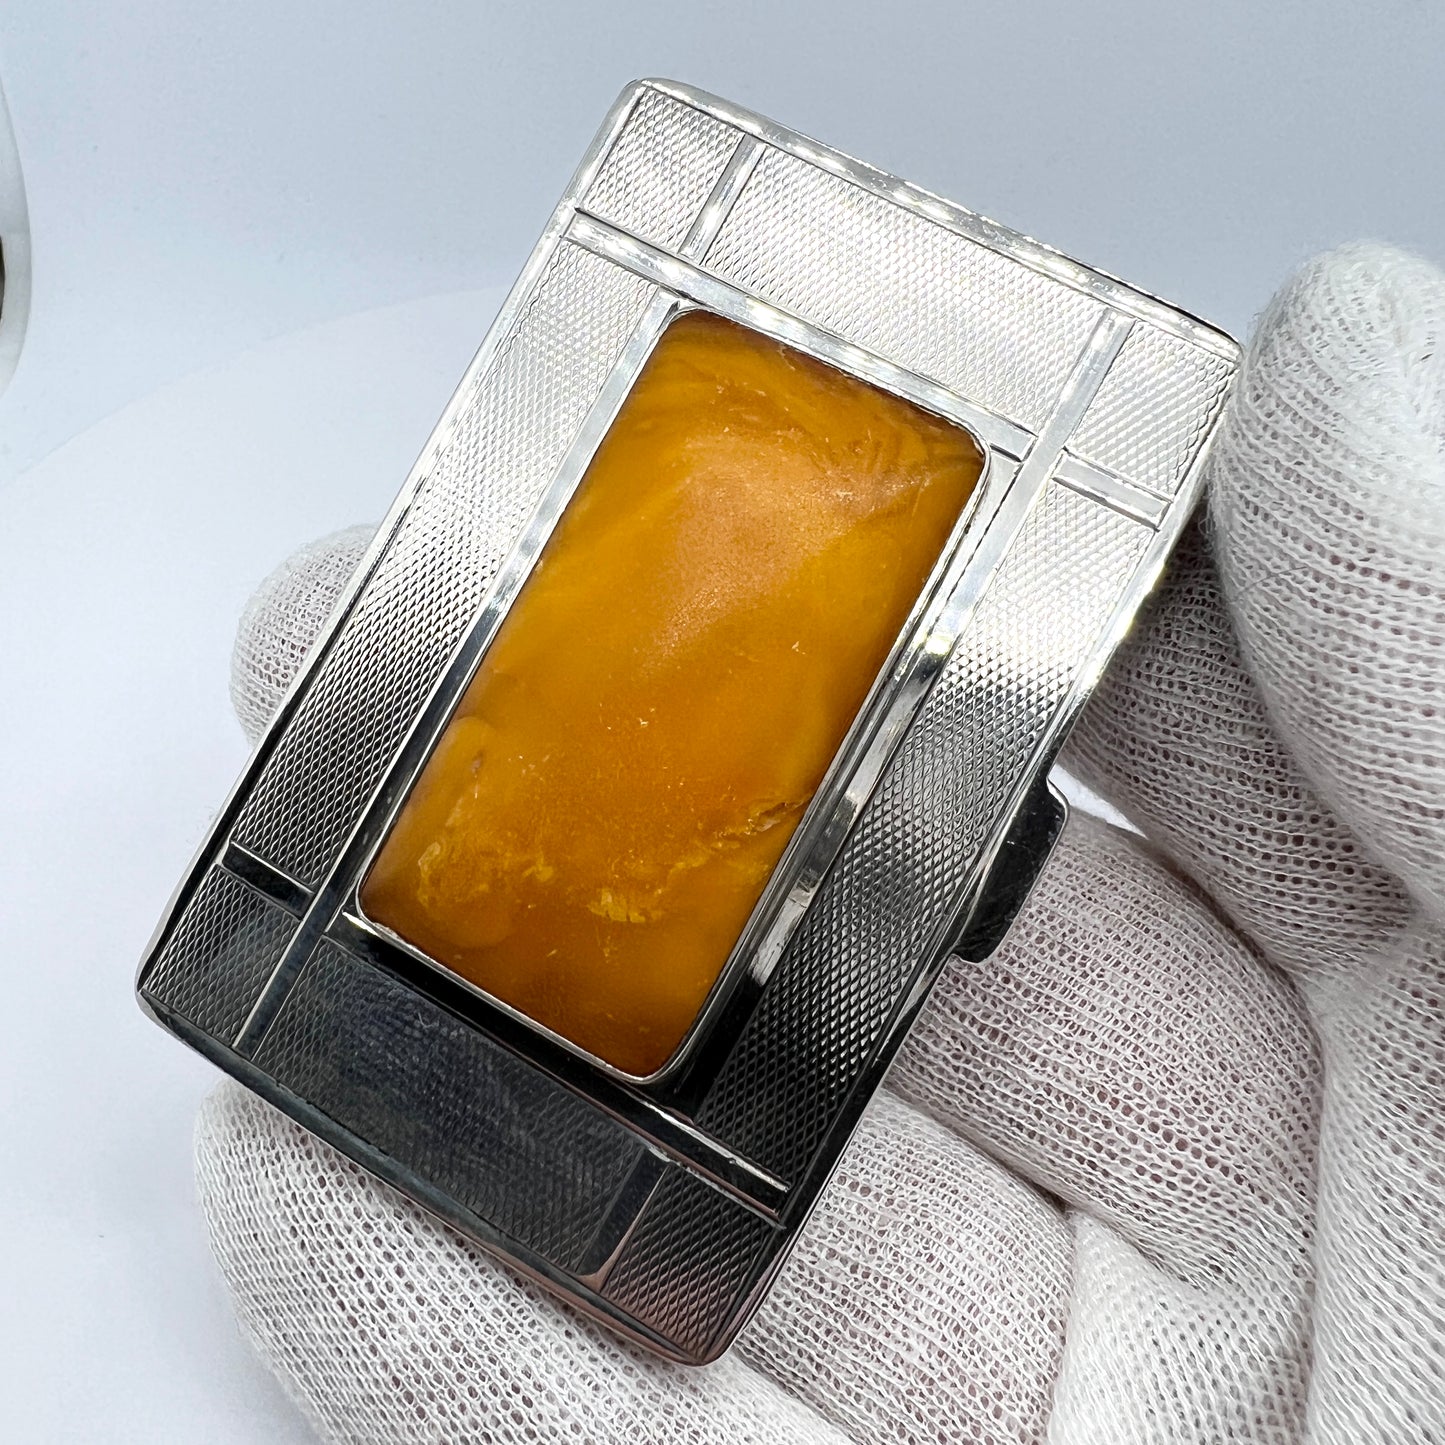 Forster & Graf, Germany 1920-30s Art Deco 830 Silver Baltic Amber Box